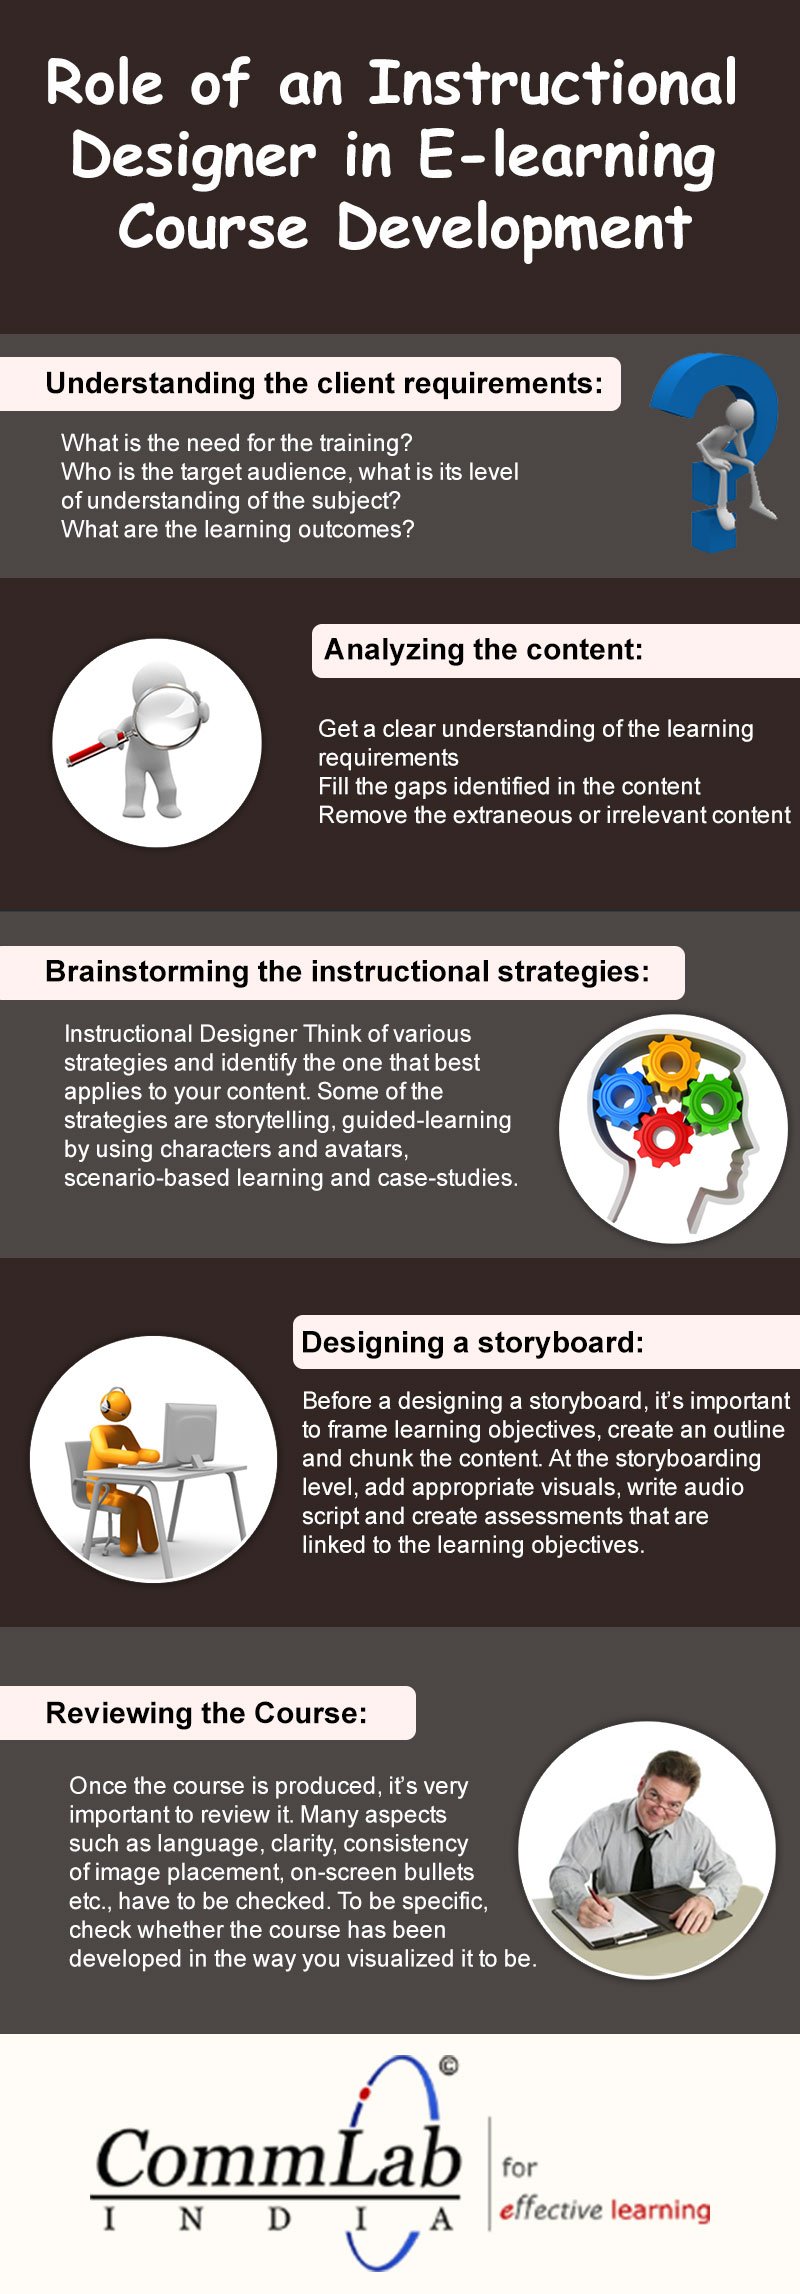 Role of an Instructional Designer in E-learning Course Development – An Infographic